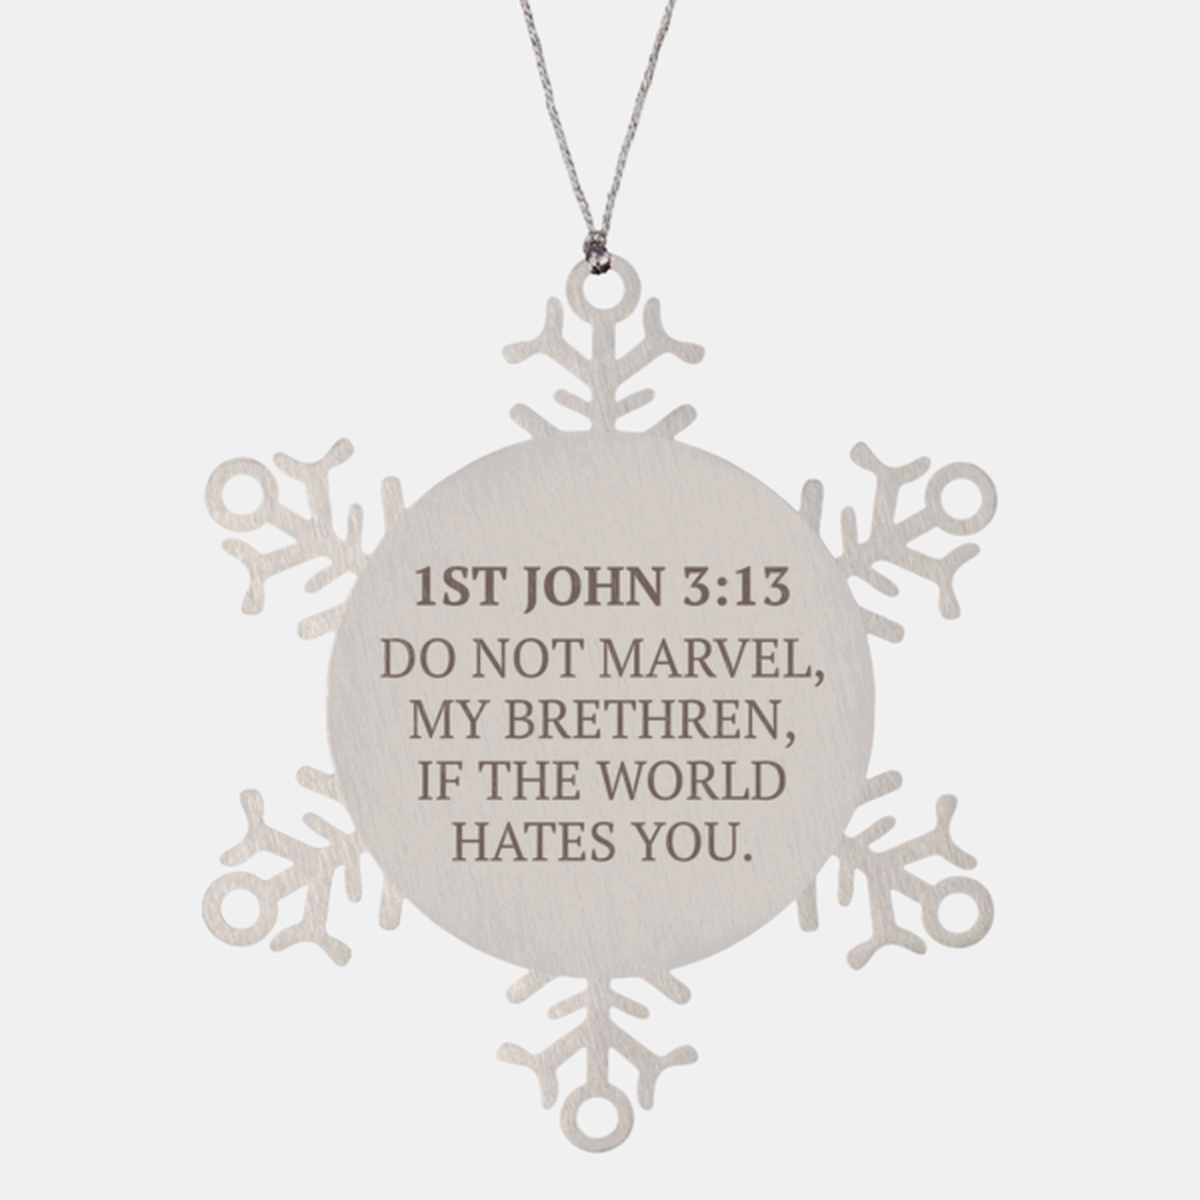 Christian Ornaments For Christmas Tree, Do Not Marvel, My Brethren, If The World Hates You, Religious Christmas Decorations, Scripture Ornaments Gifts, Bible Verse Ornament